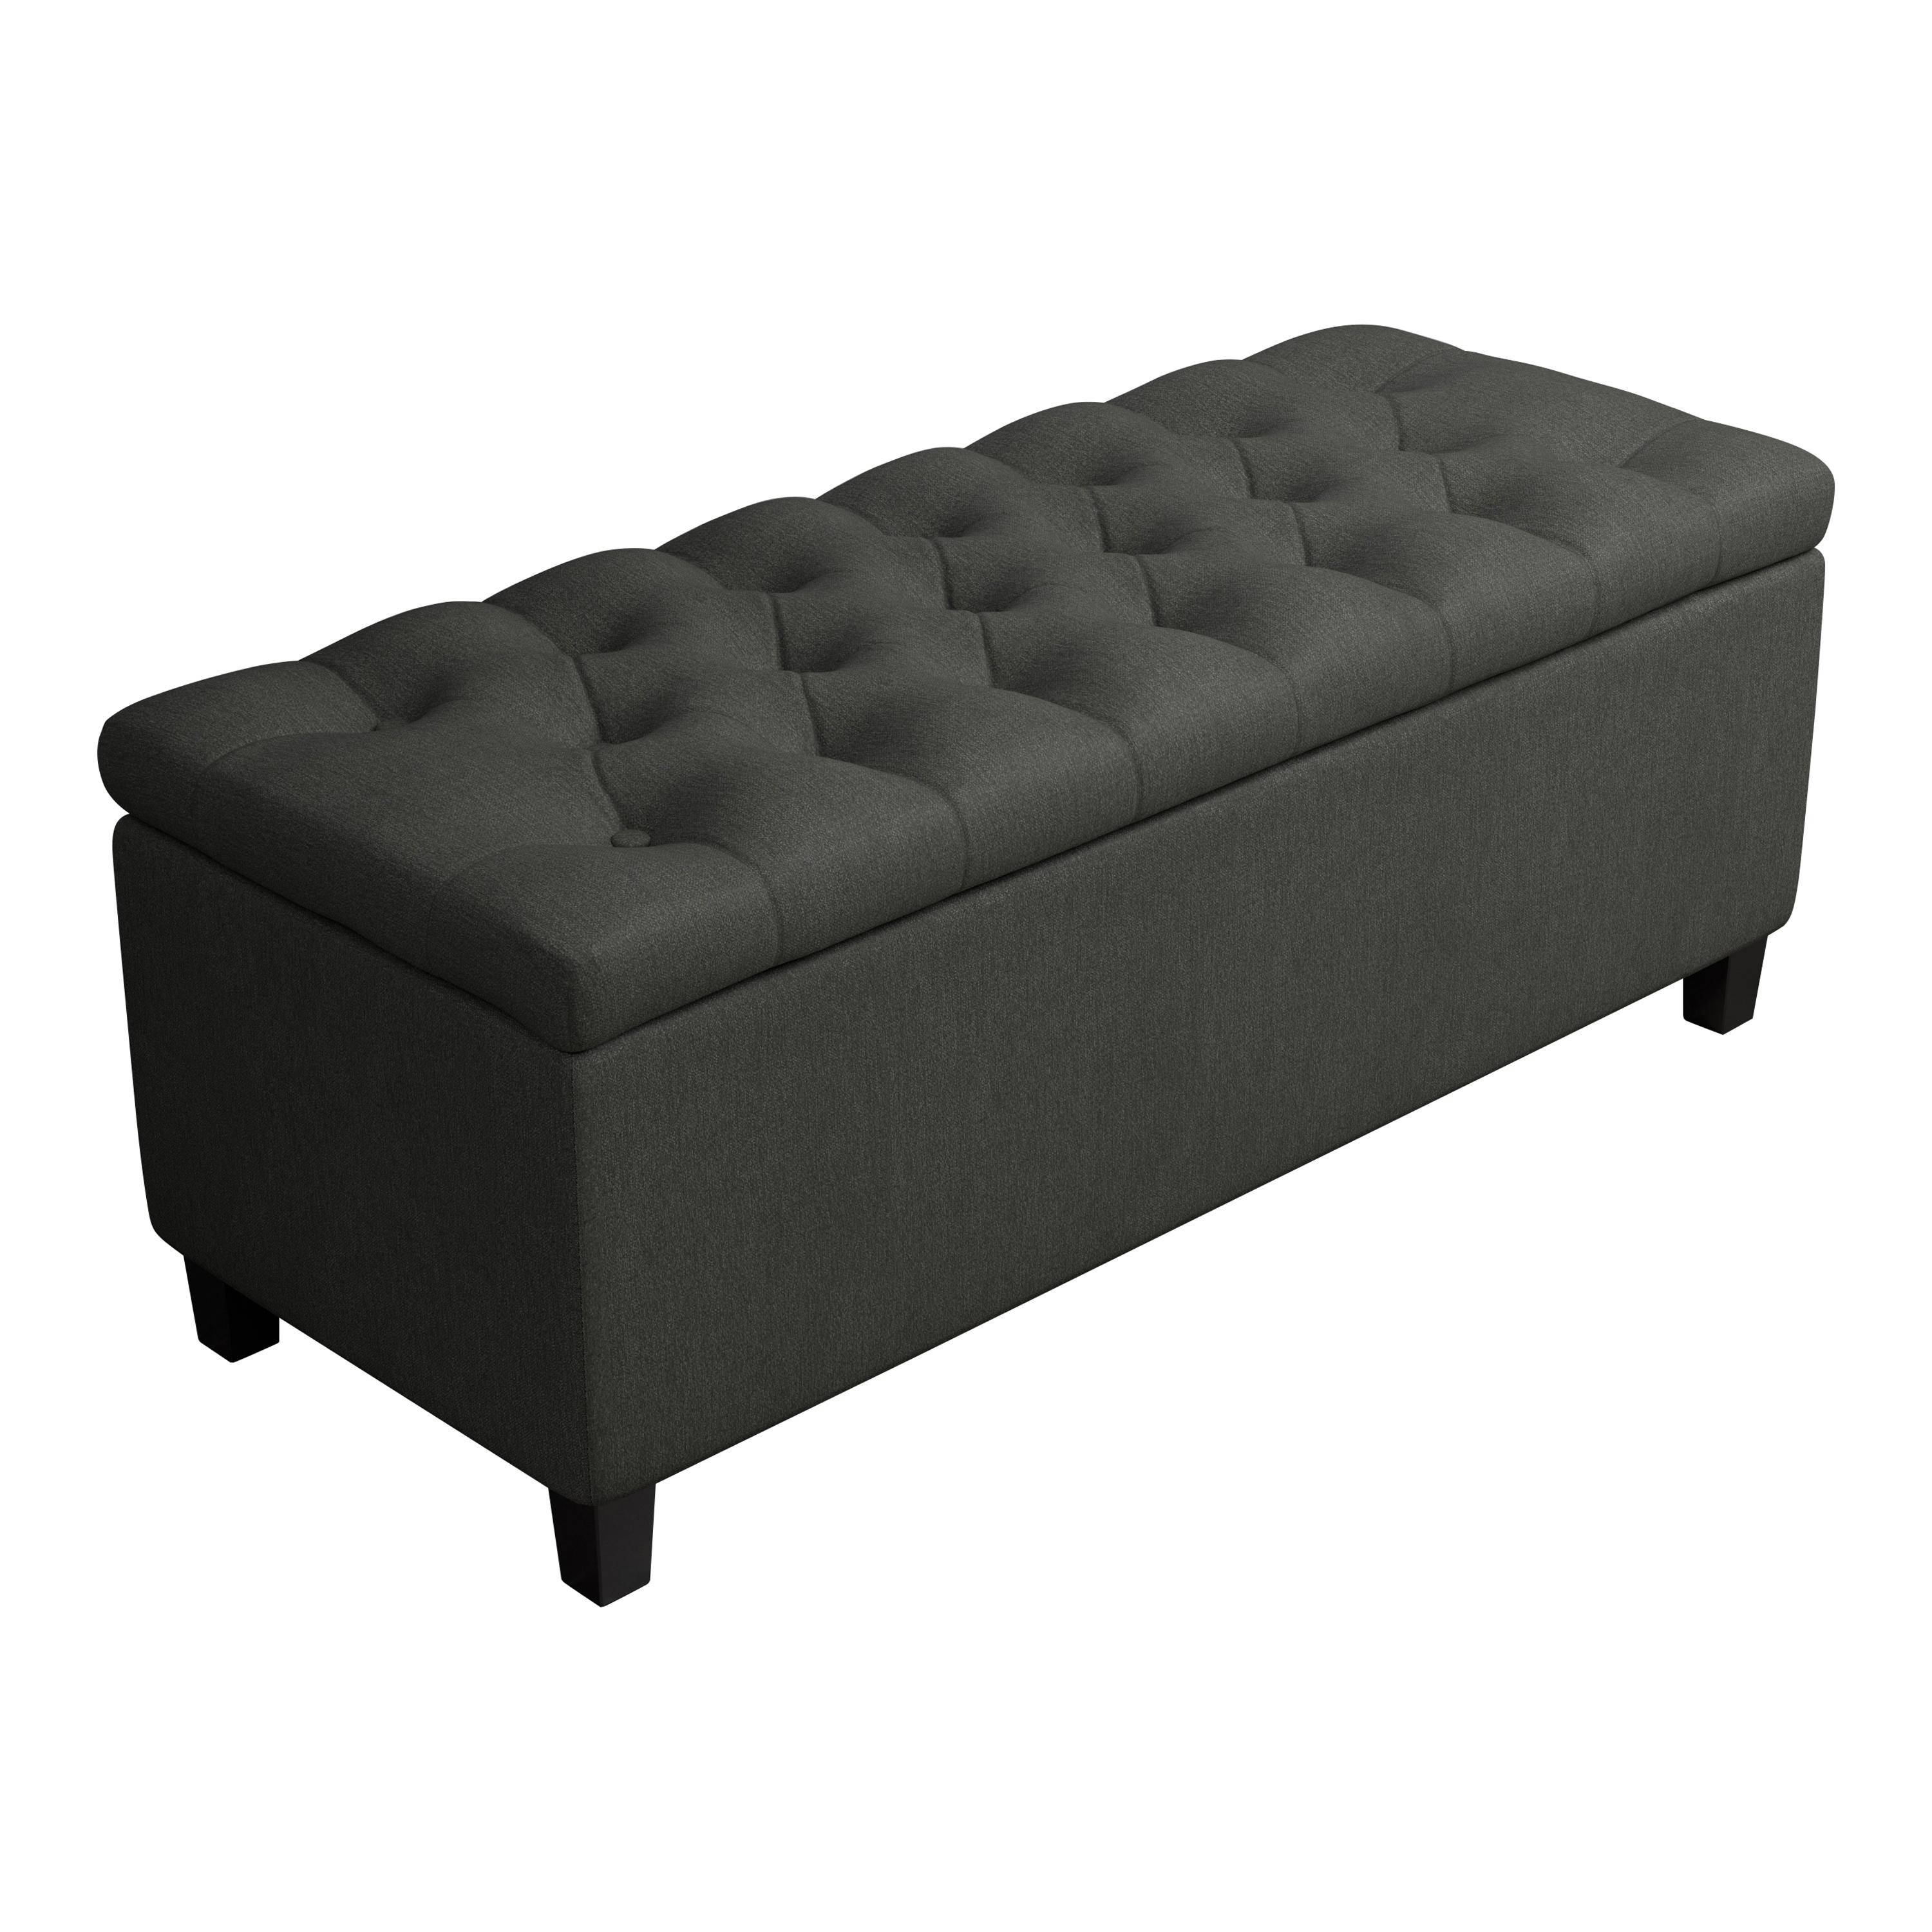 Transitional Bench 915143 915143 in Charcoal Fabric